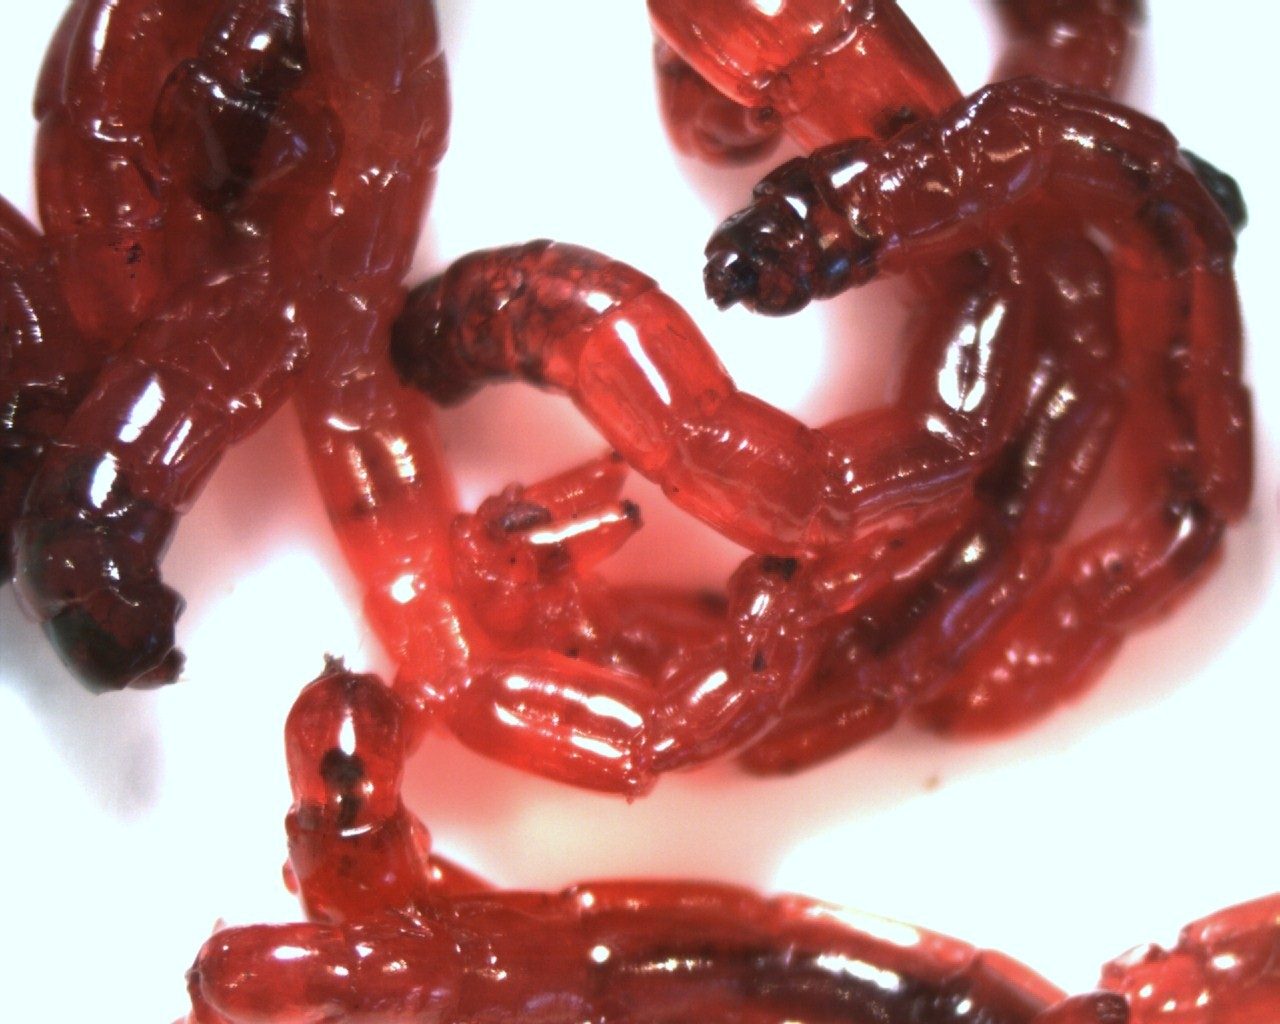 blood-worms-for-tropical-fish-bloodworms-culture-breeding-for-sale-aquaticmag-7-1764721